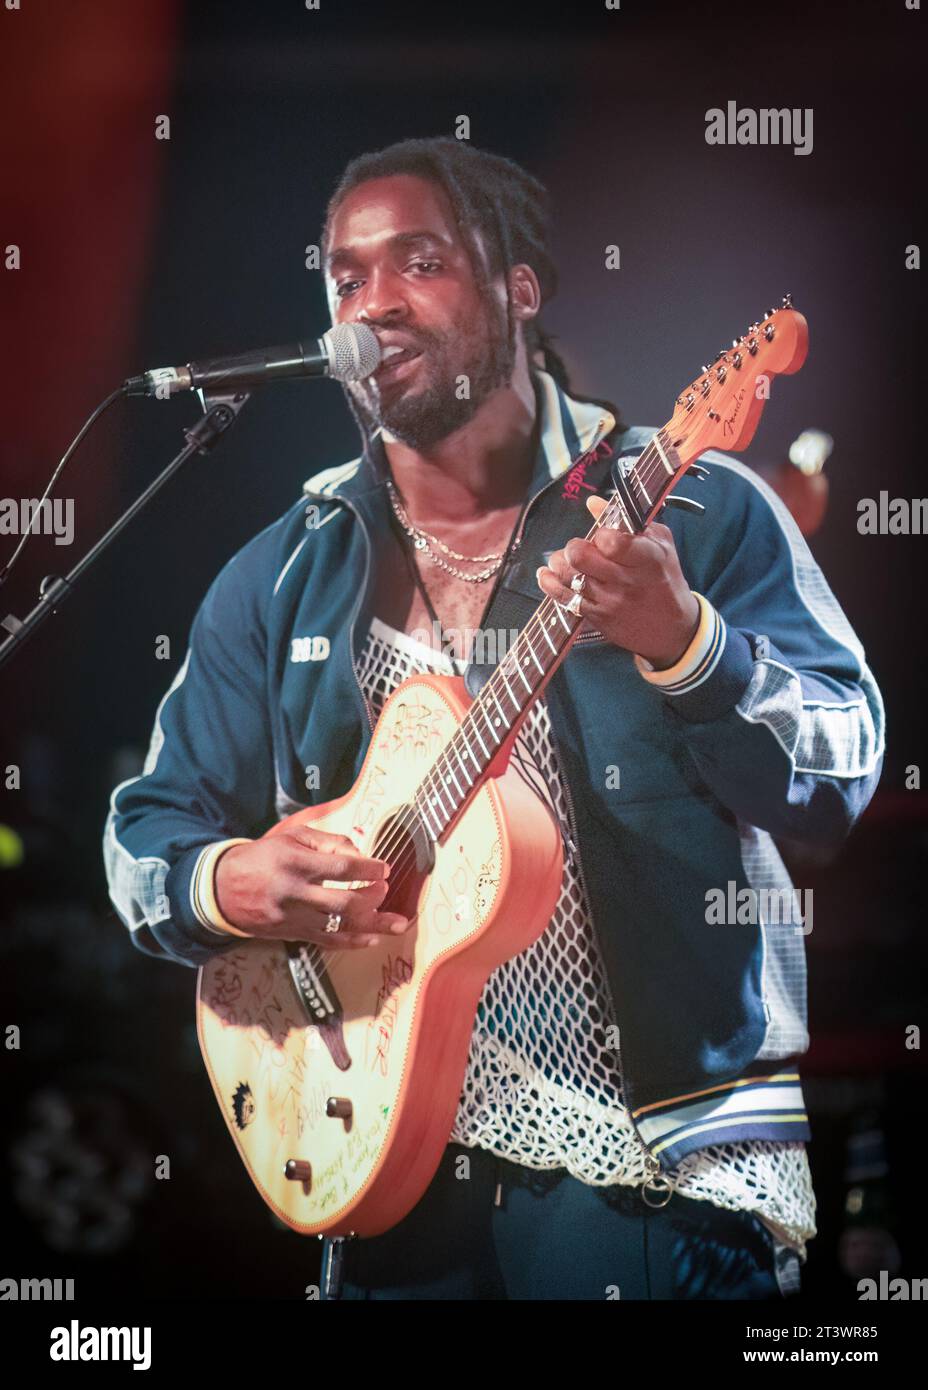 Nottingham, United Kingdom. 26th October 2023, Event: Rock City. “THE STREETS” with Special Guests “HAK BAKER” and “MASTER PEACE”.   PICTURED: HAK BAKER.  Credit: Mark Dunn/Alamy Live News (To be included where the image is published). Stock Photo